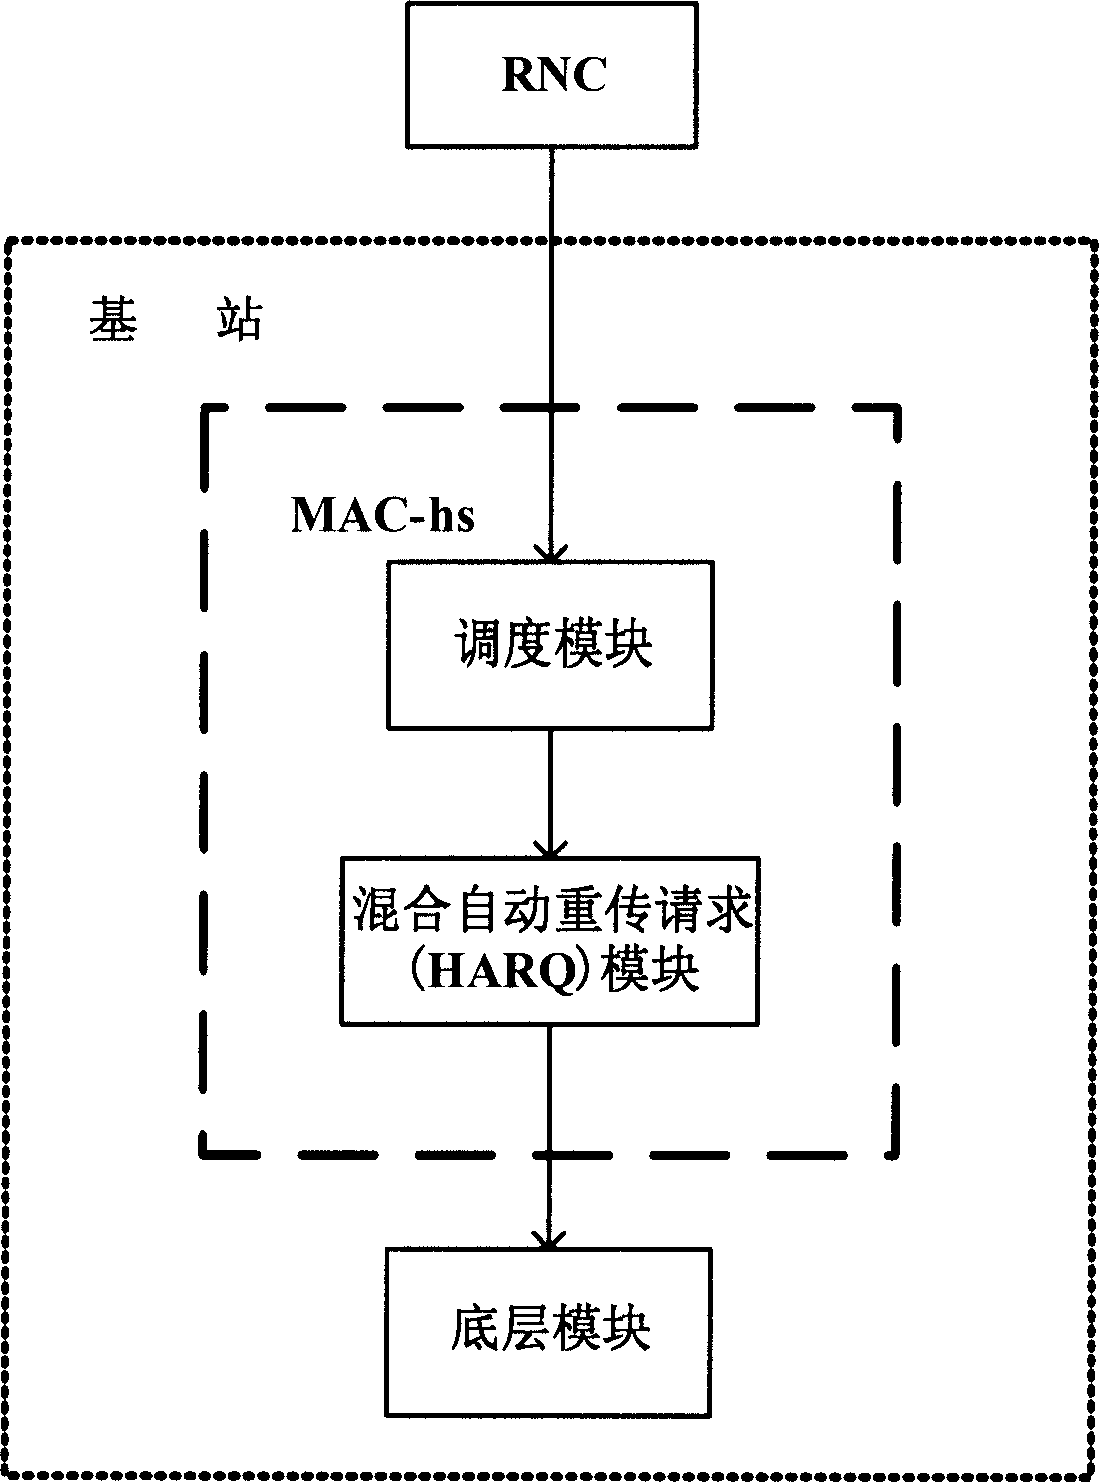 Mixing automatic retransmission method in accessing down going packet in high speed and multiple carriers, and application